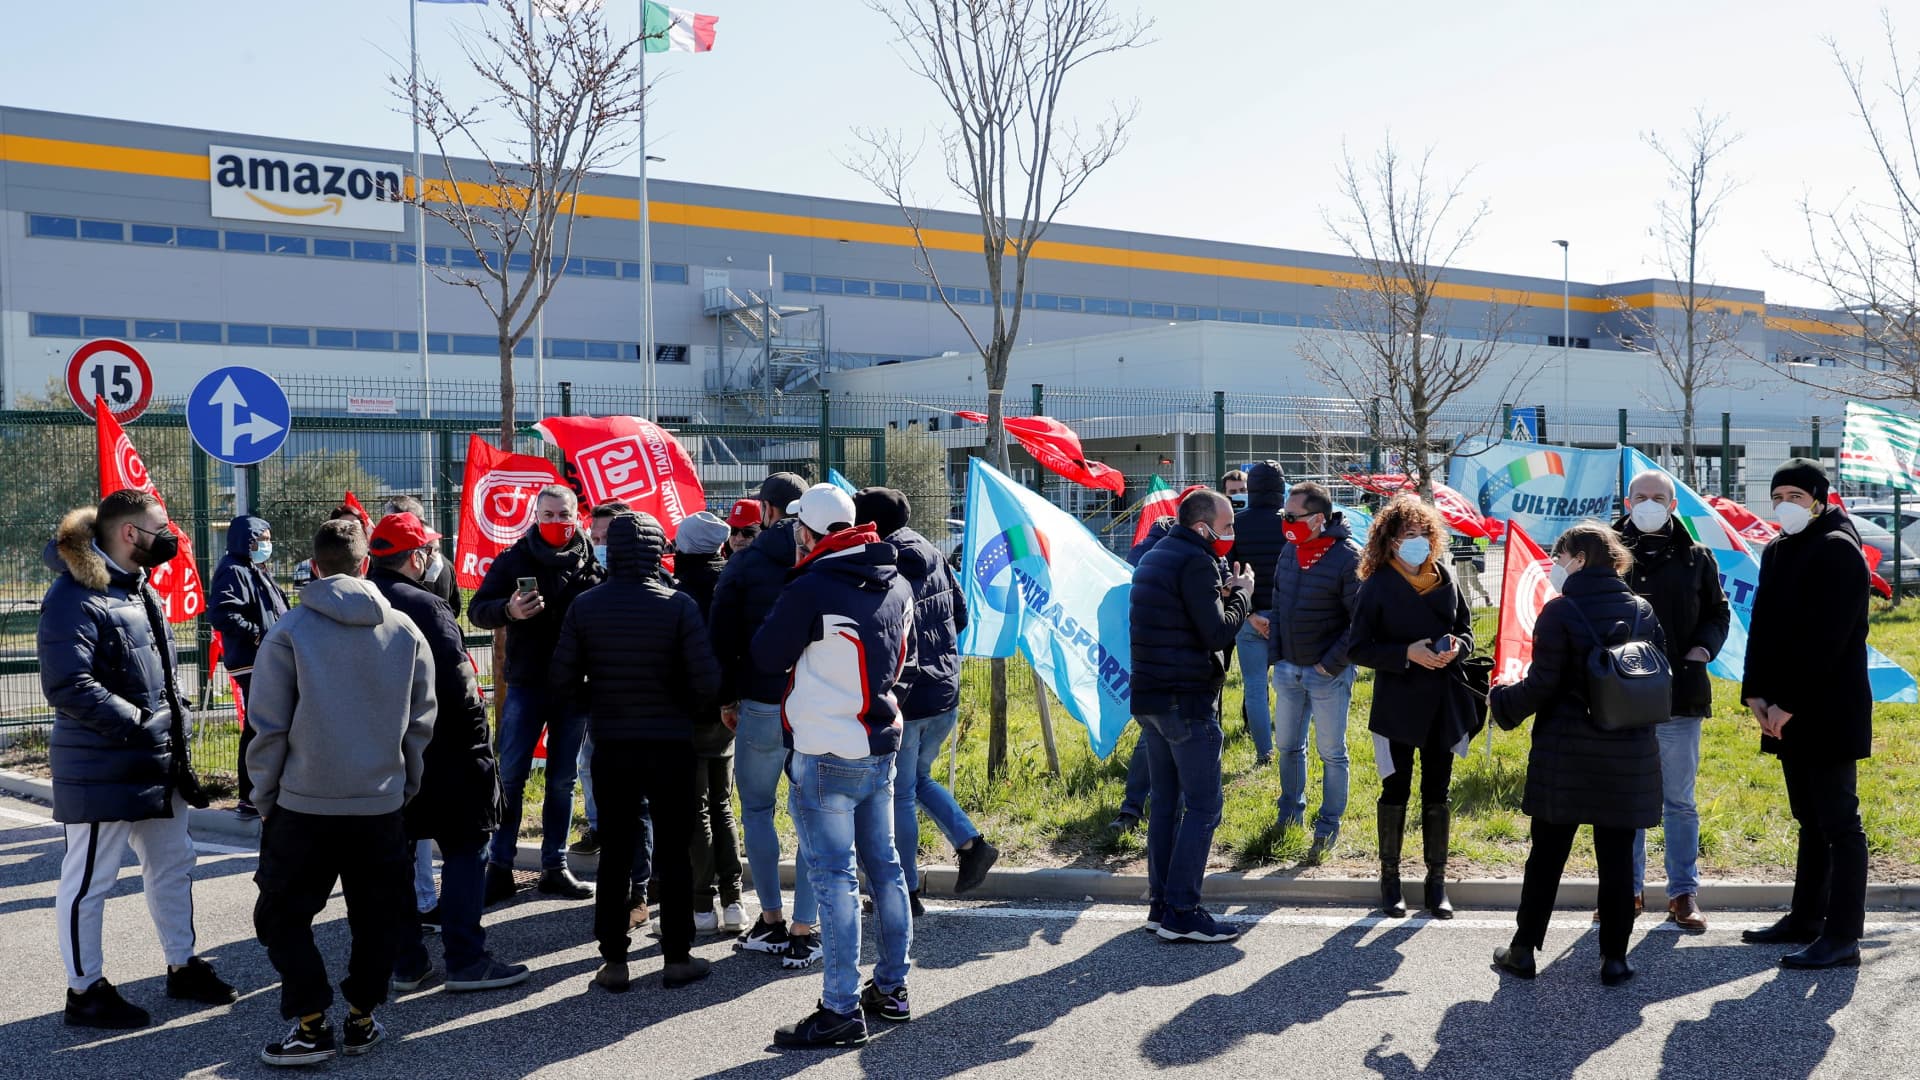 Workers at Amazon's logistics operations in Italy protest outside a distribution centre in Passo Corese, Italy March 22, 2021.